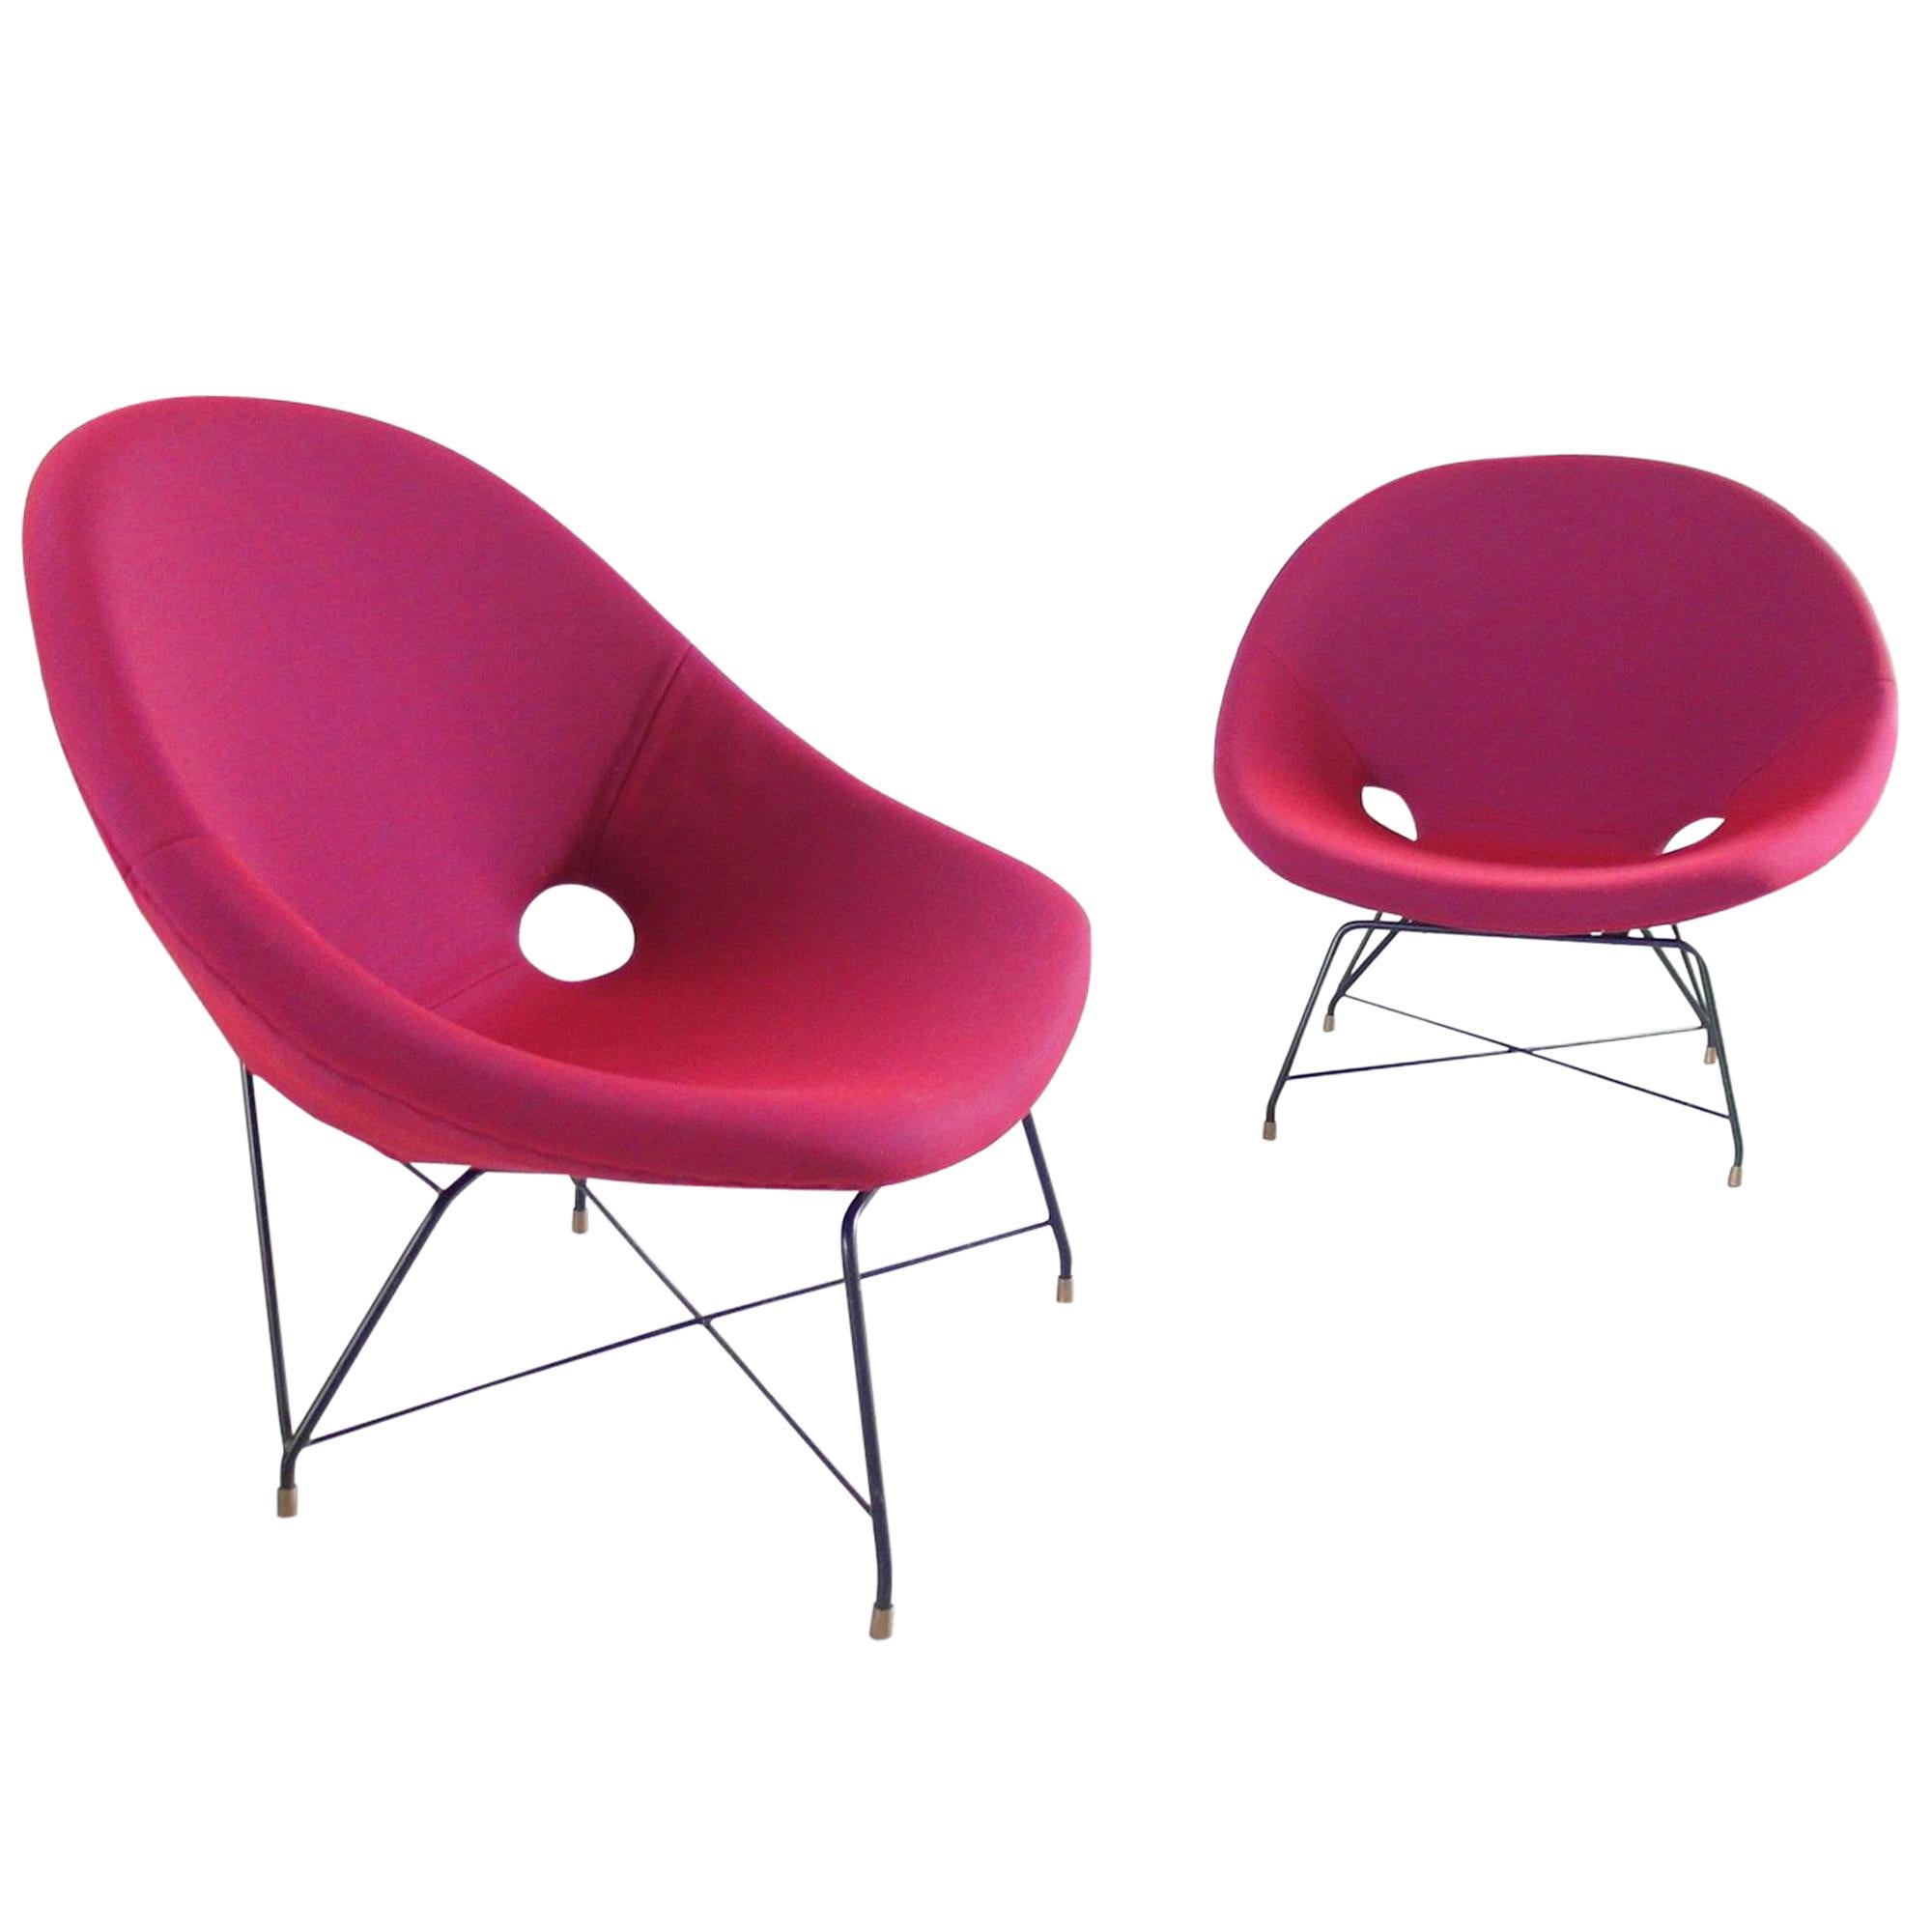 Pair of Cosmos Chairs in Ruby red/ Raspberry red by Augusto Bozzi for Saporiti For Sale